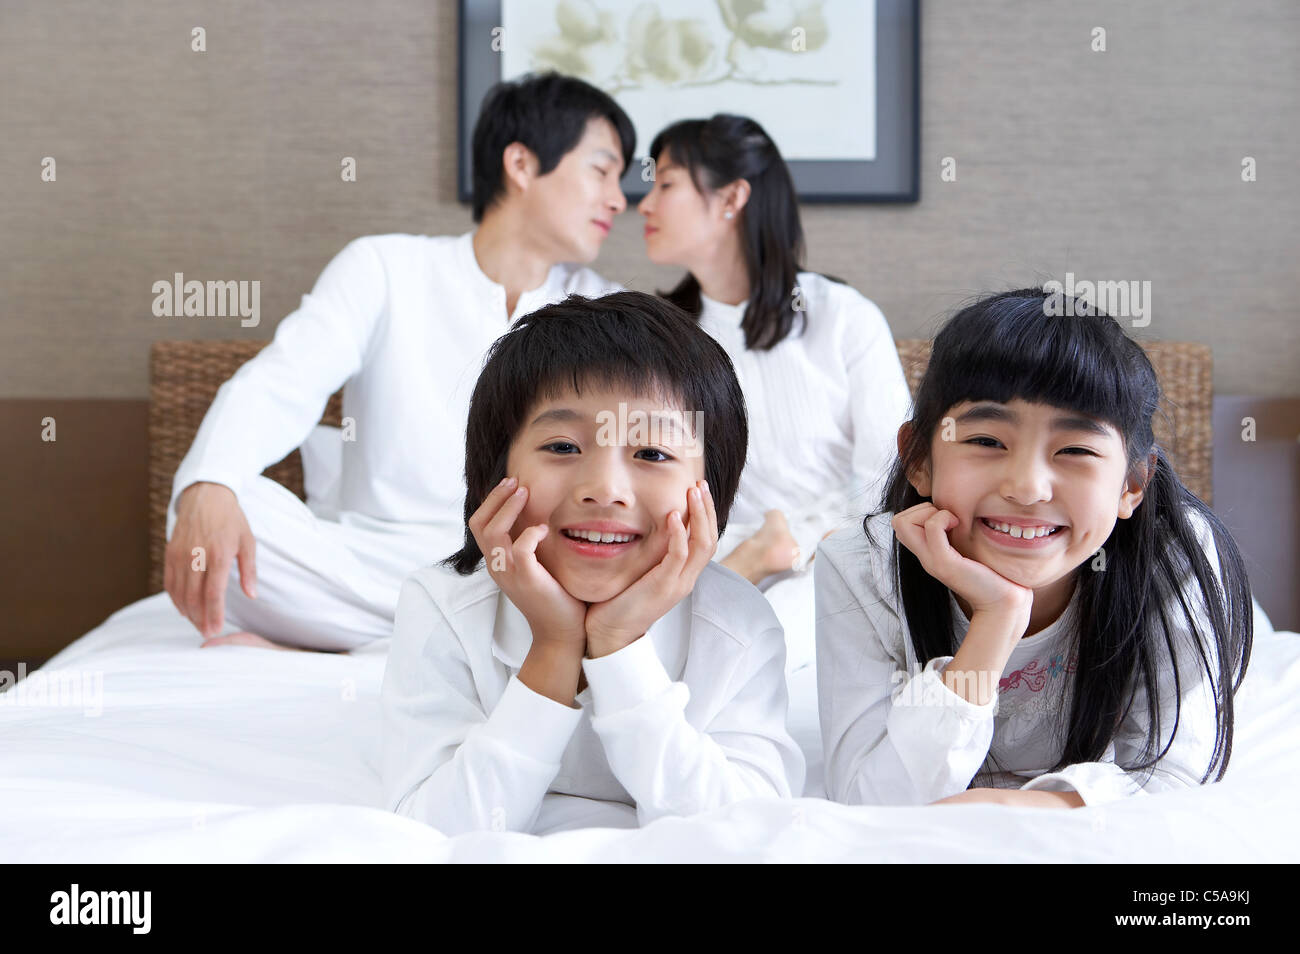 Close-up of children smiling, while parents kissing in background Stock Photo